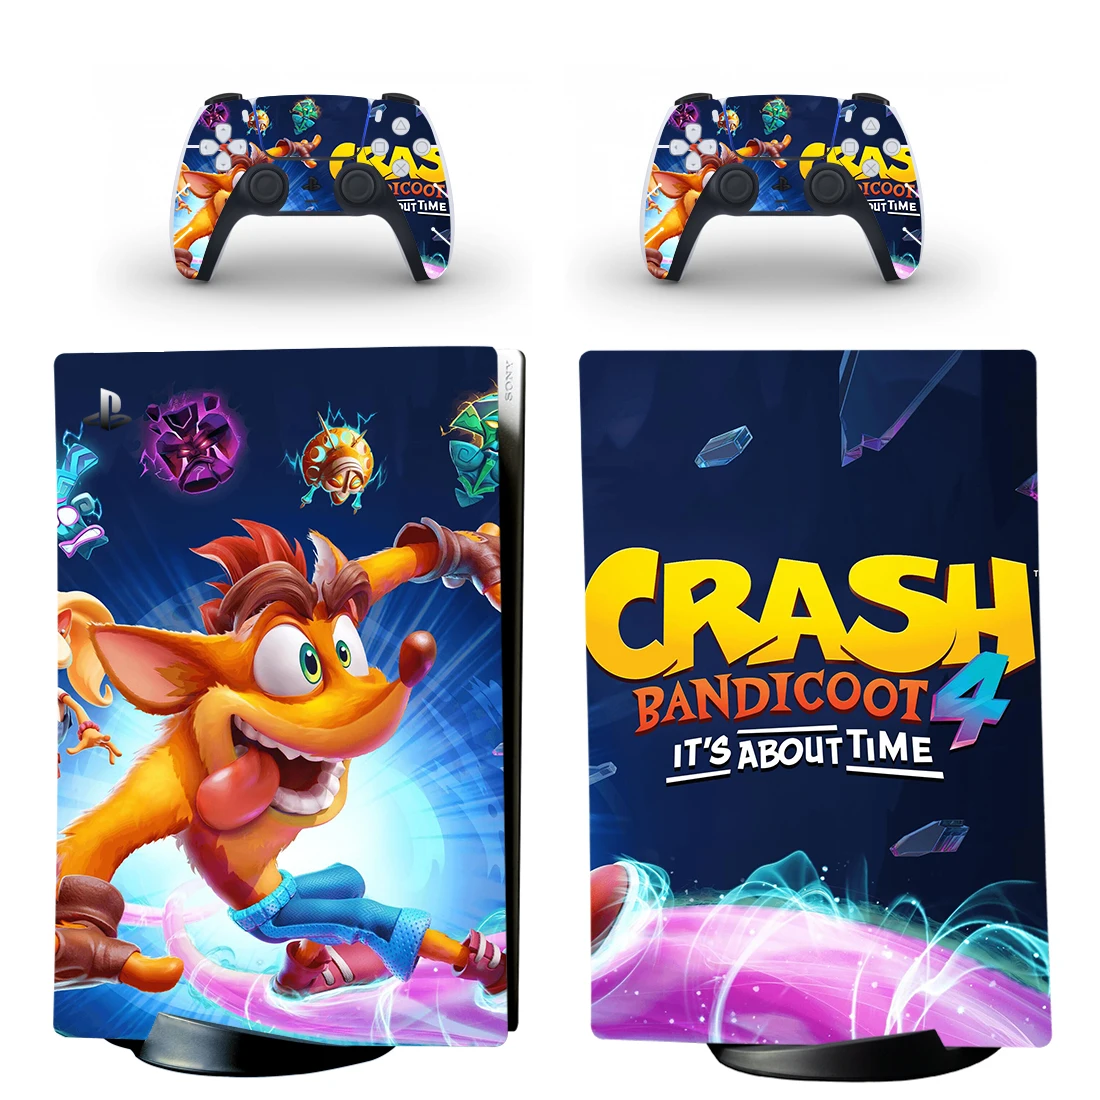 

Crash Bandicoot PS5 Digital Edition Skin Sticker Decal Cover for PlayStation 5 Console and Controllers PS5 Skin Sticker Vinyl